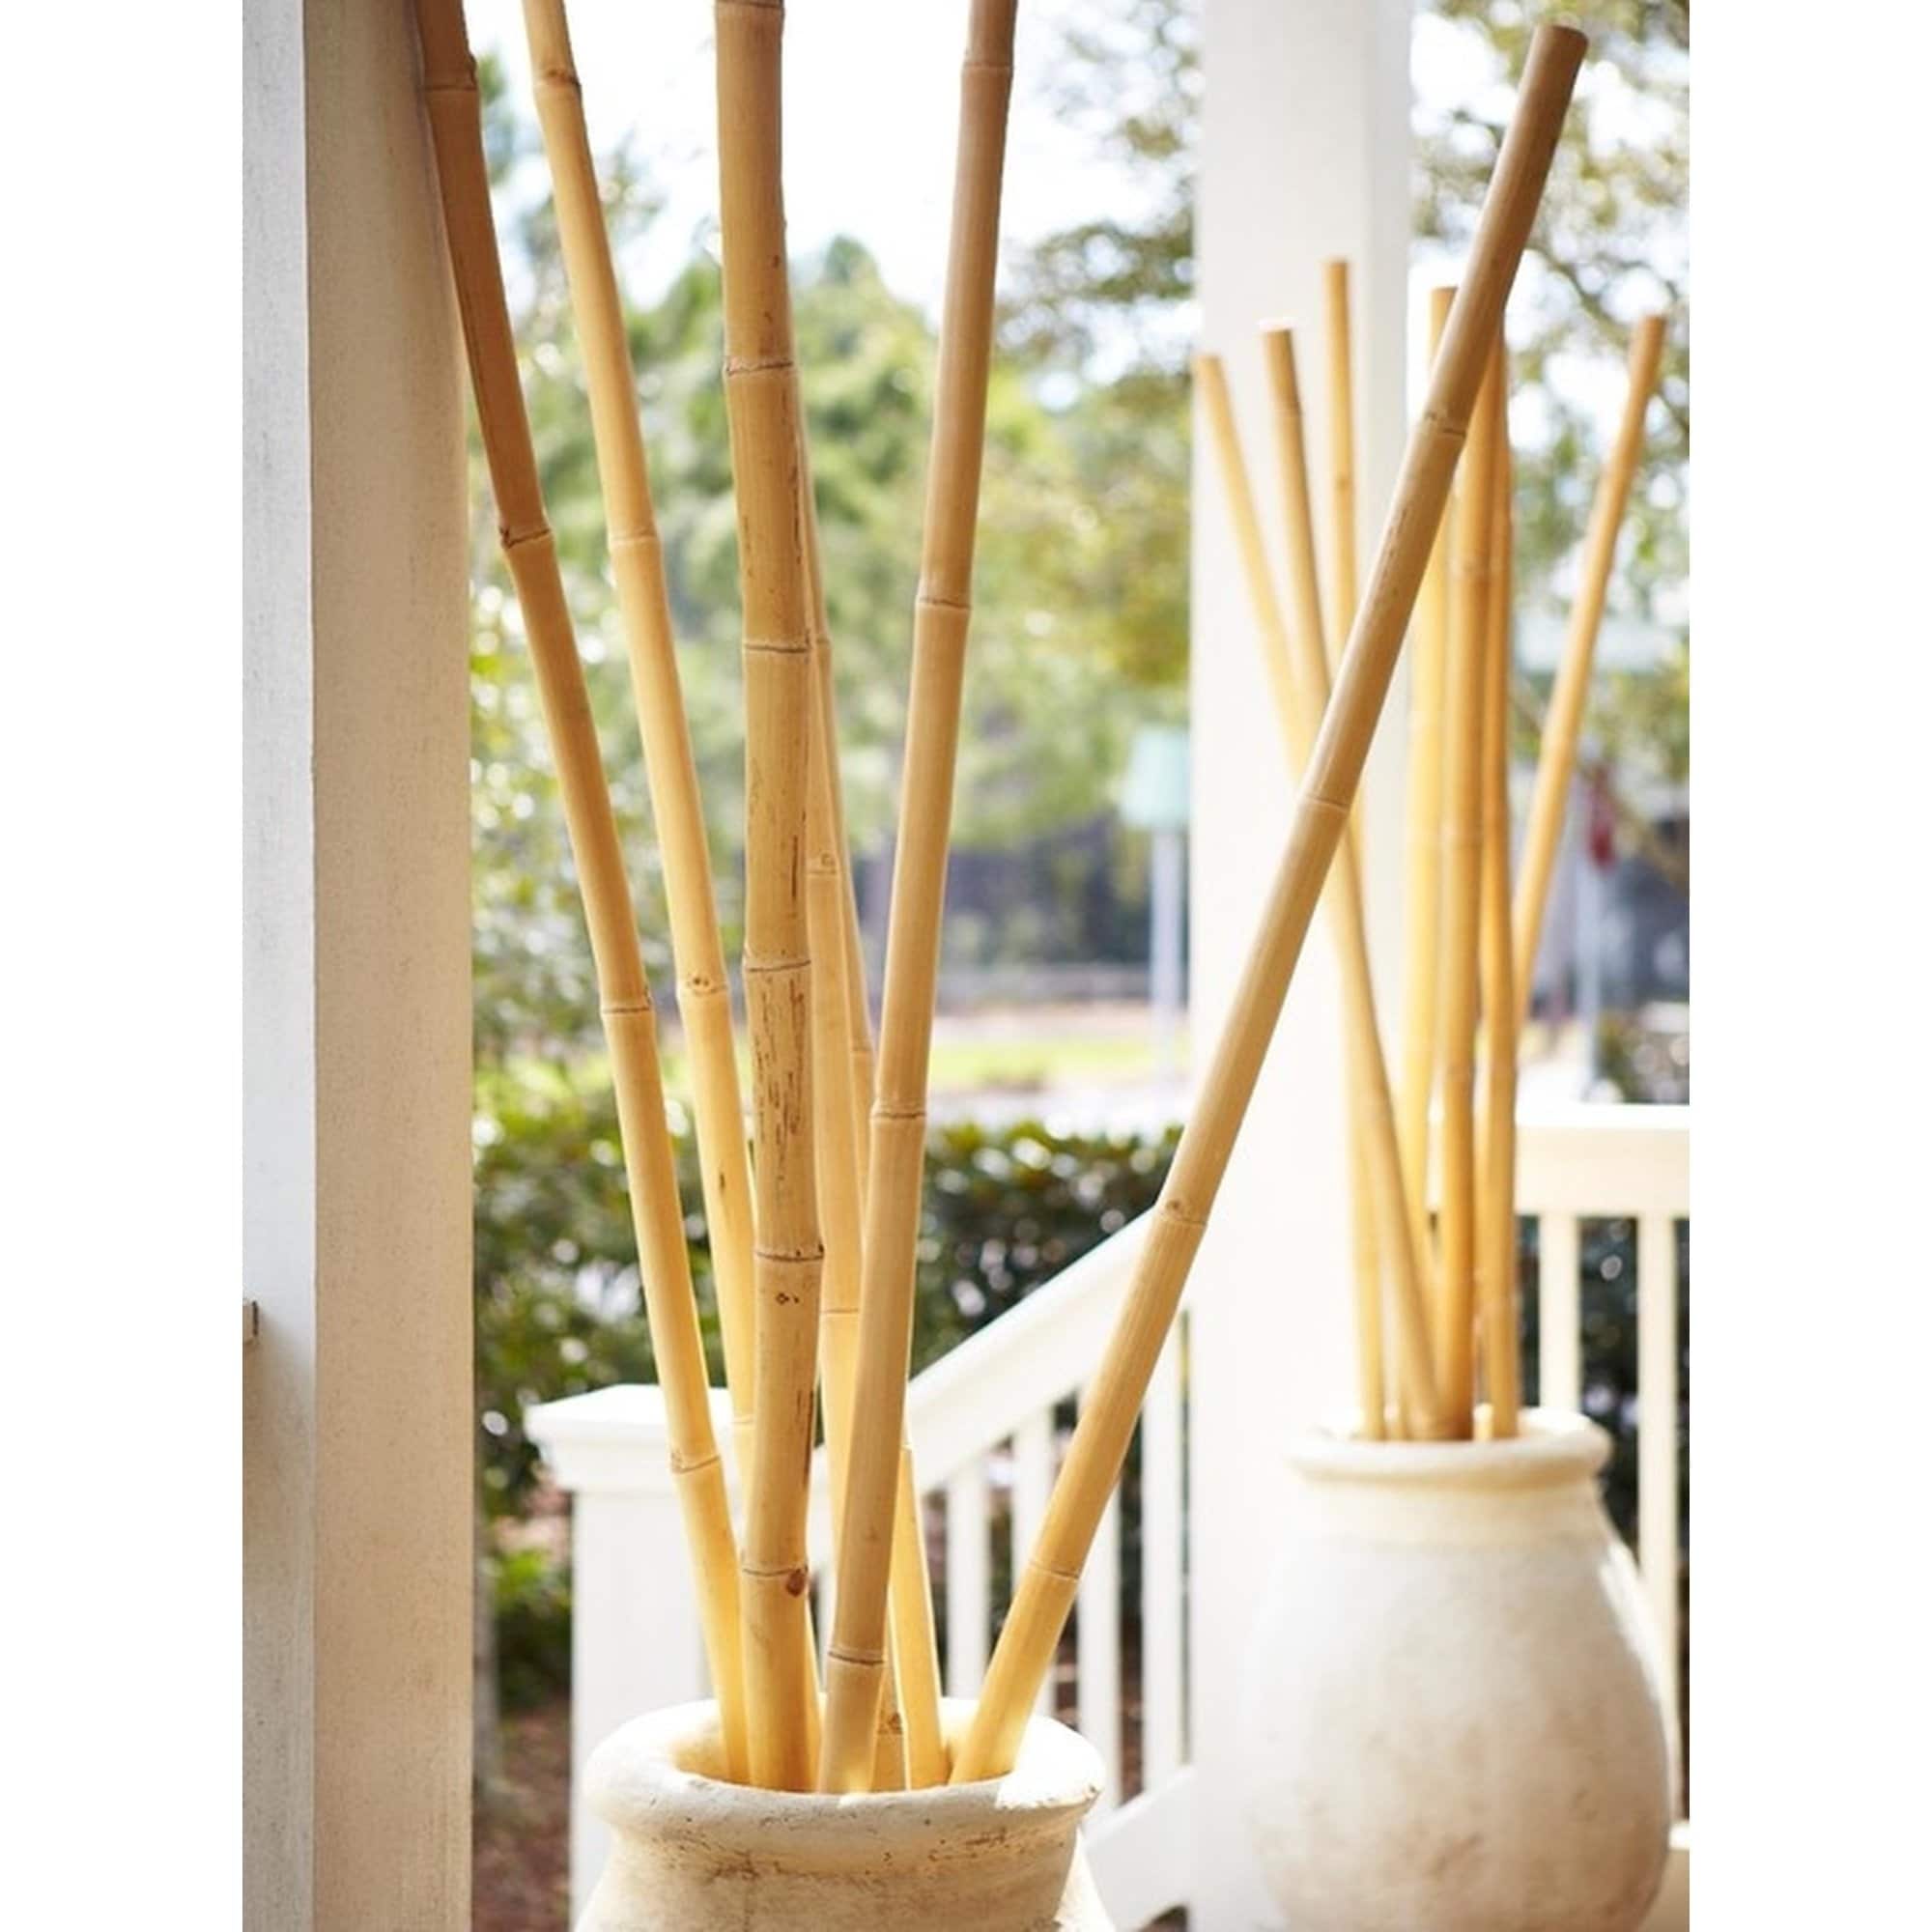 Natural Decorative Bamboo Poles Fence Garden Stakes (10 Poles) - 2 in x 90 in